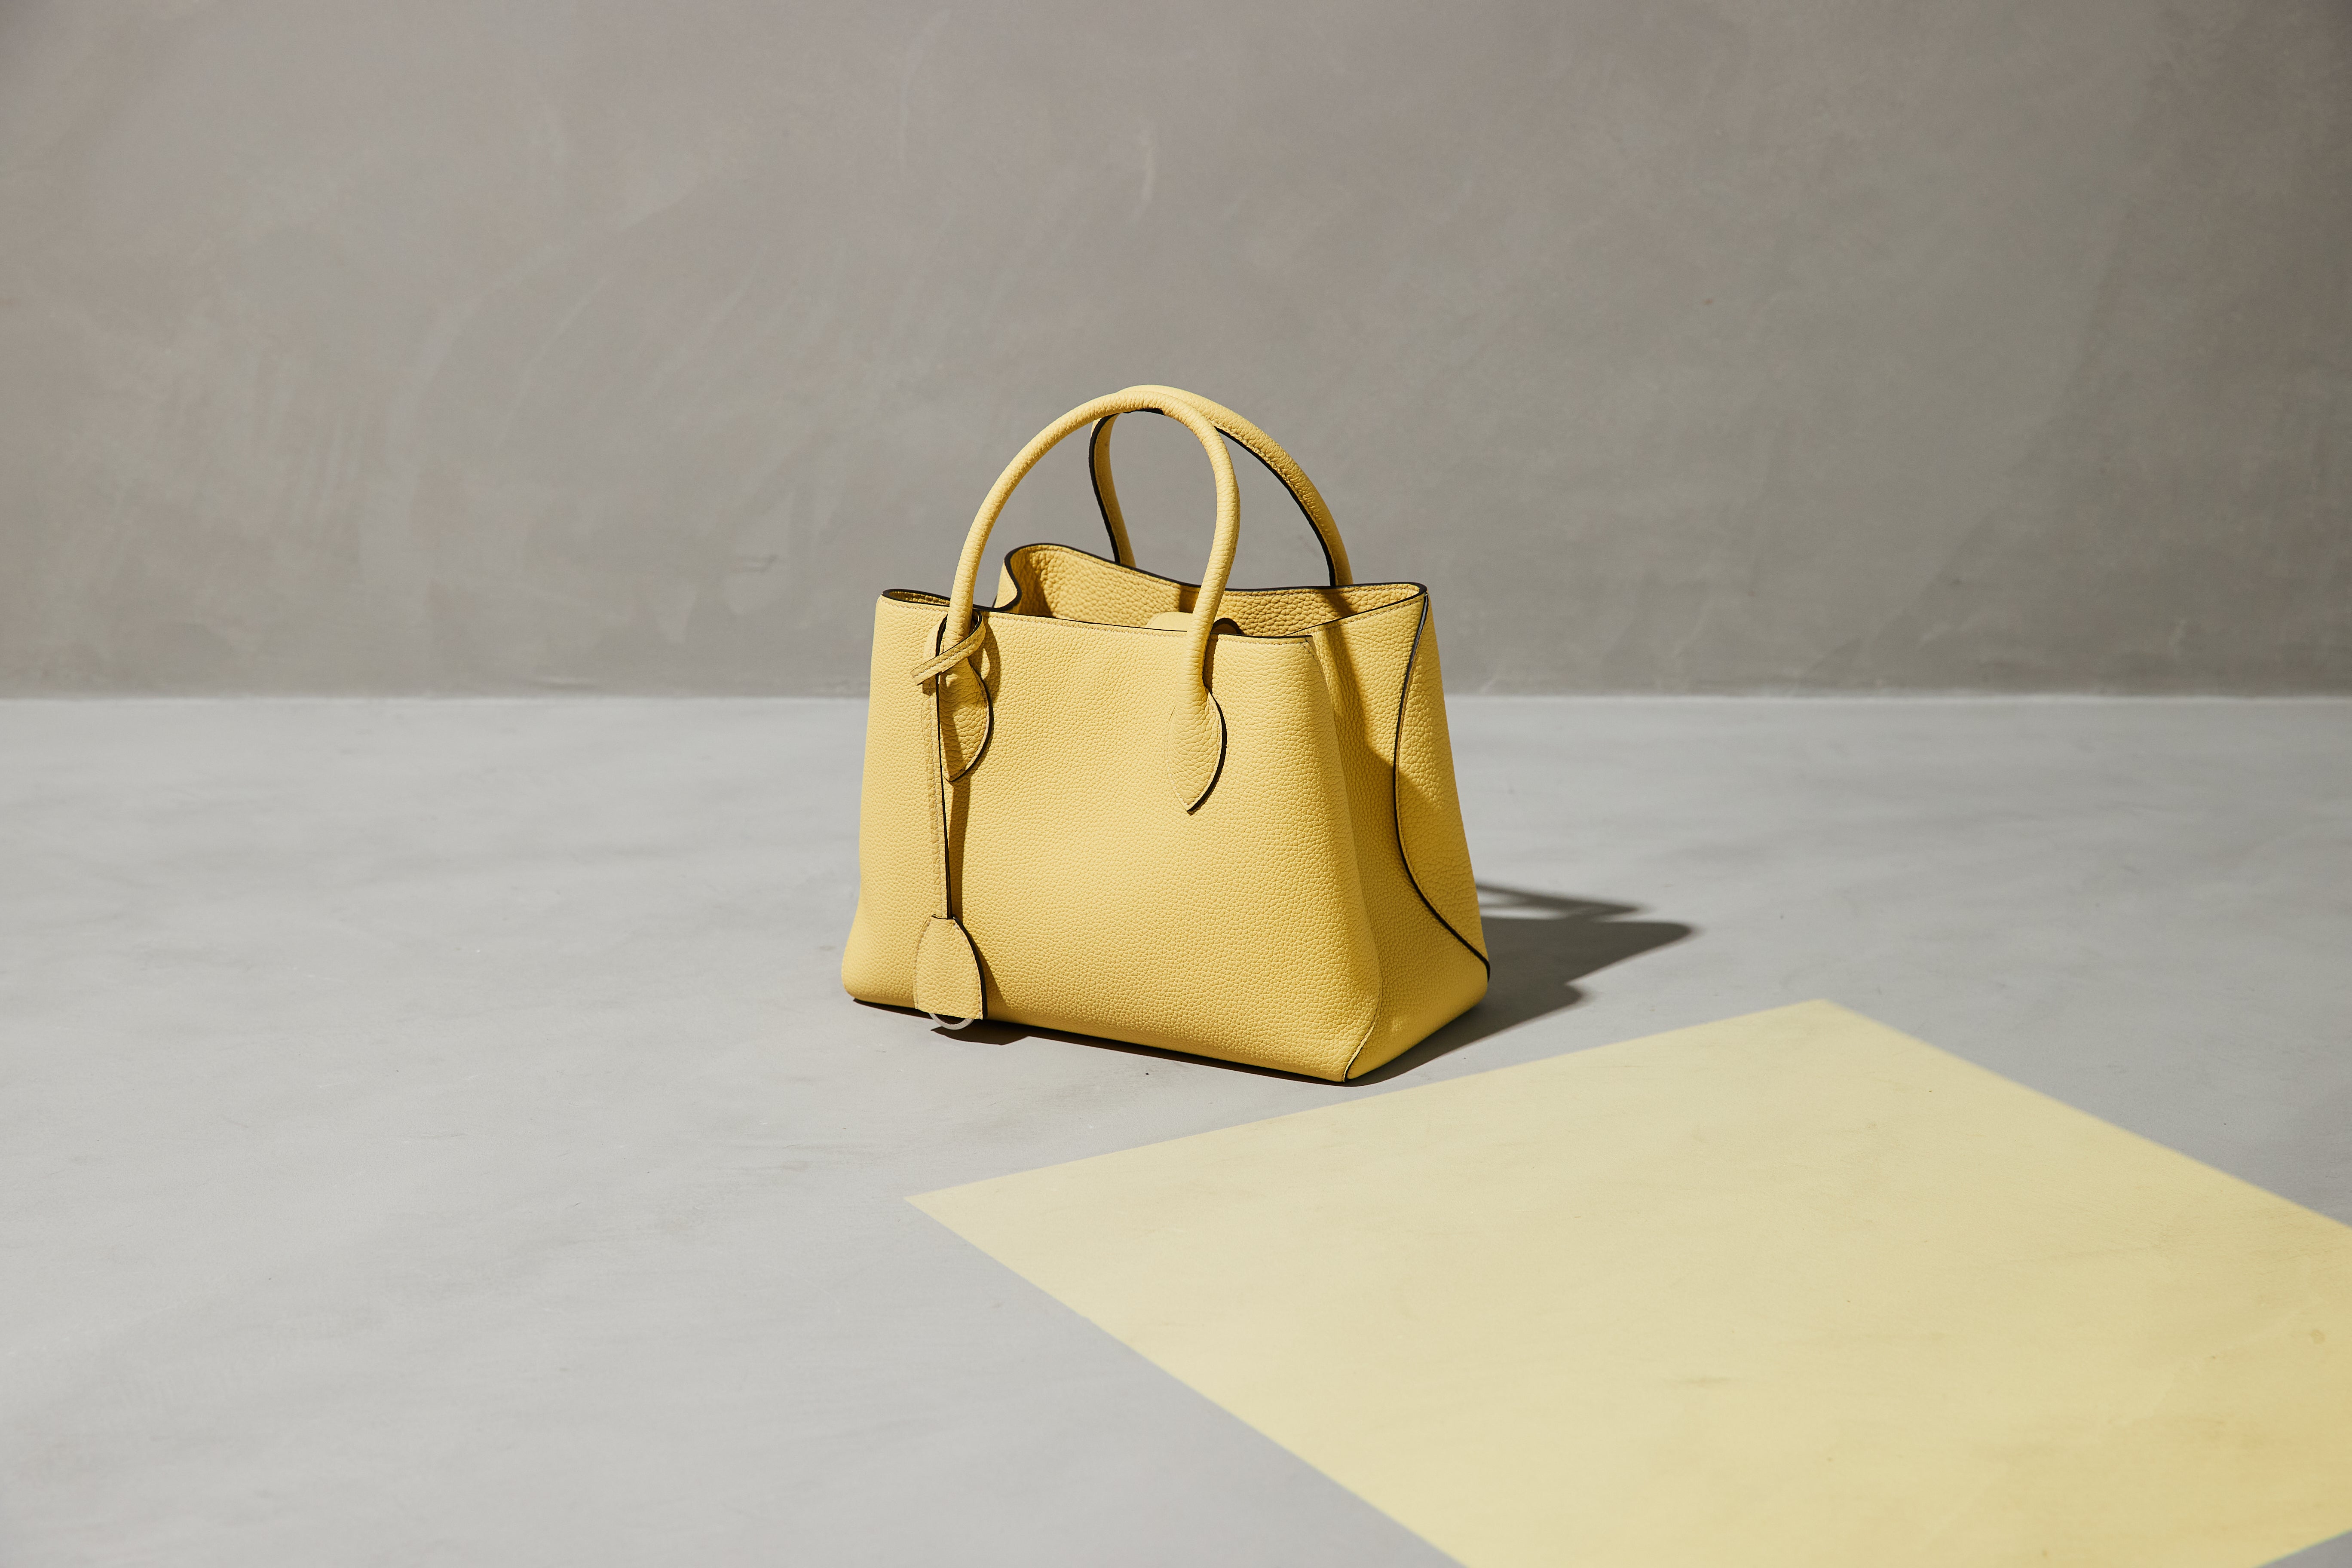 The Mia Tote Bag in the trending color yellow from BONAVENTURA